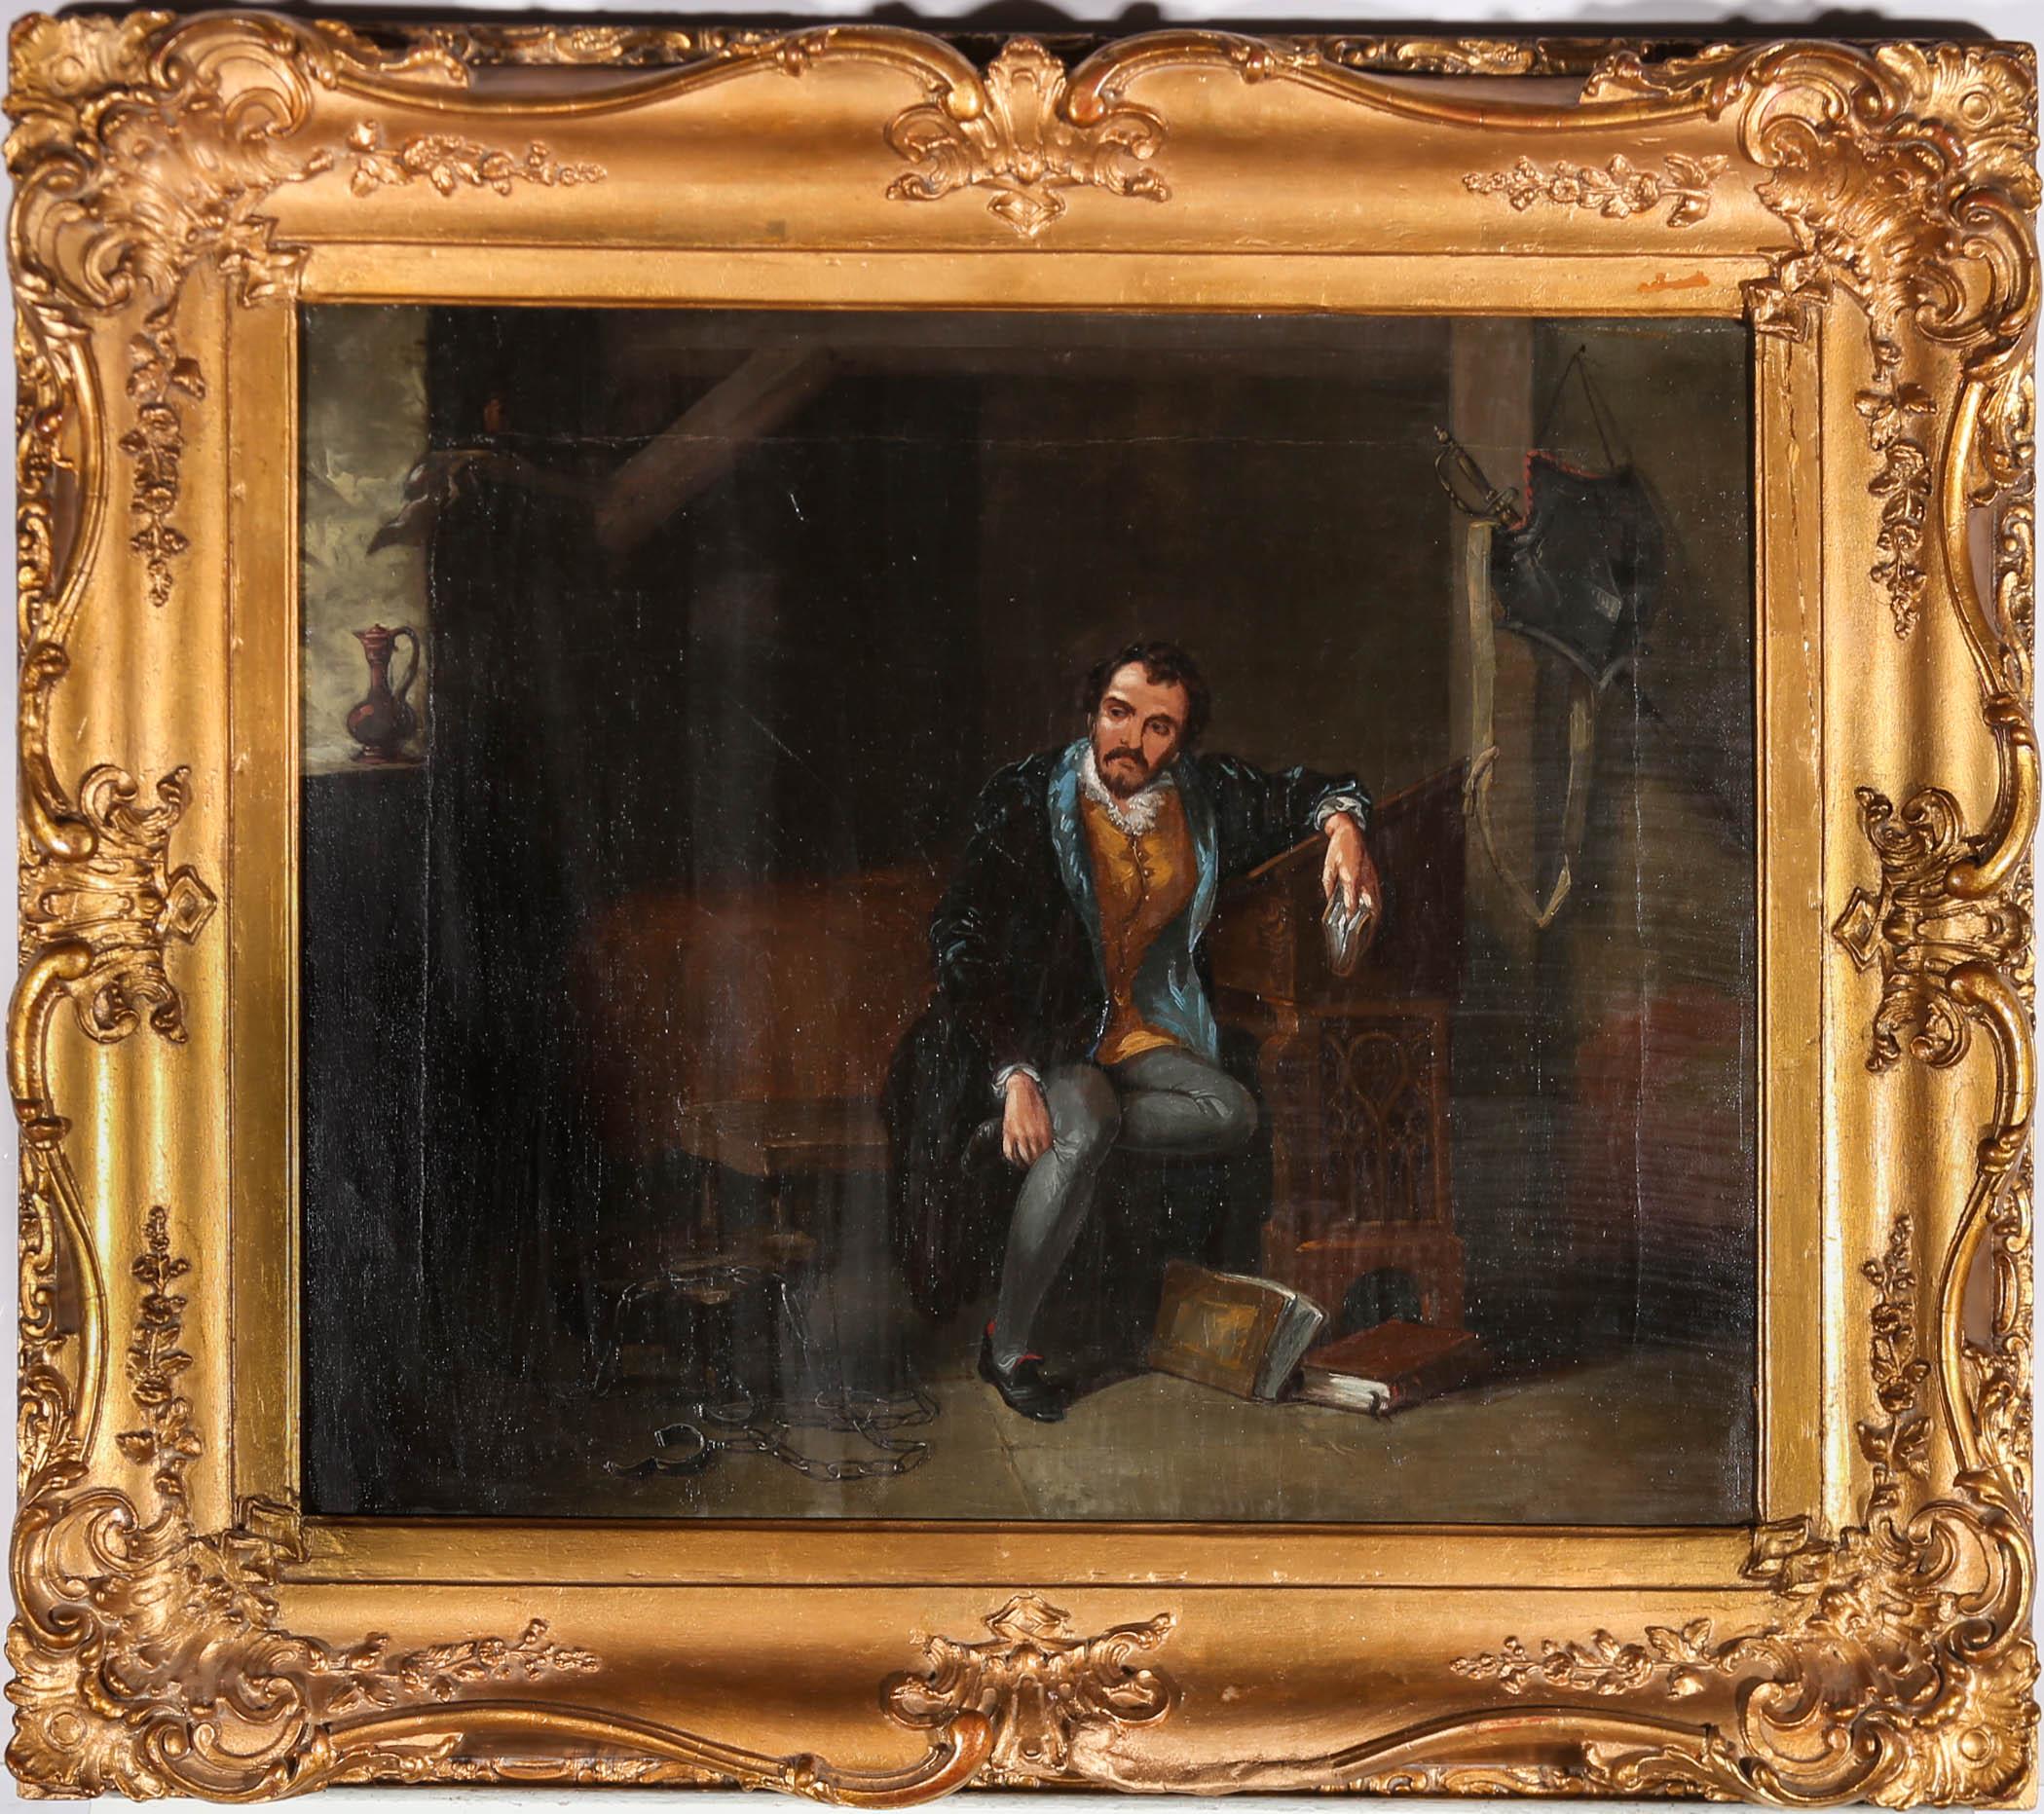 Unknown Figurative Painting - Framed 19th Century Oil - Shakespearean Player